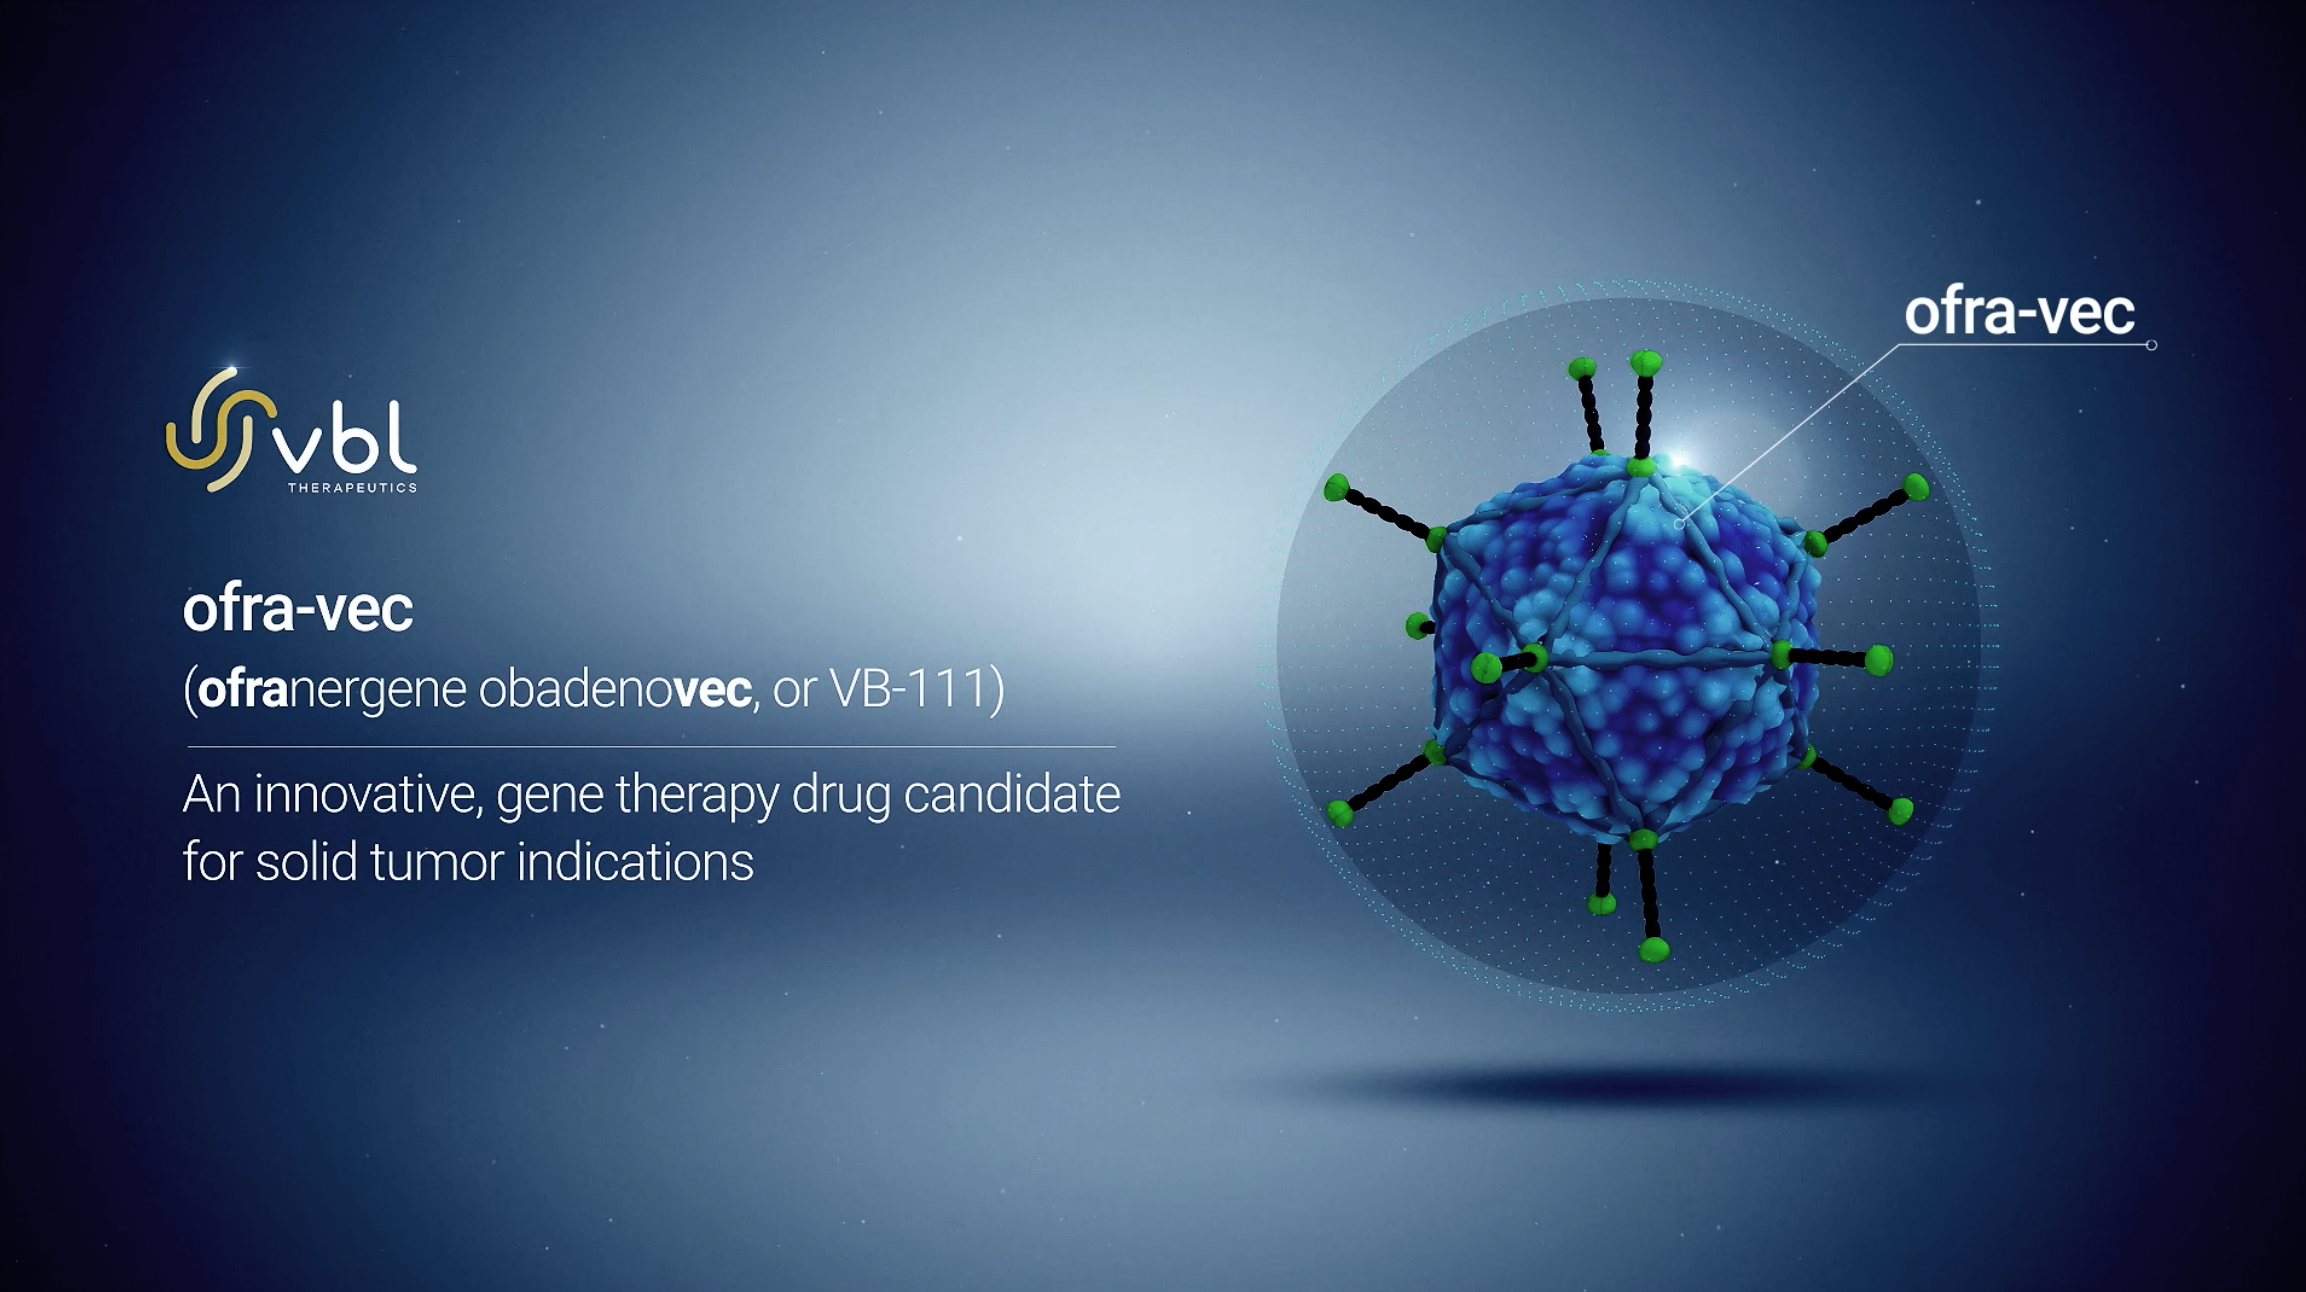 A Graphic representation of Ofra-vec (ofranergene obadenovec, or VB-111): An innovative, gene therapy drug candidate for solid tumor indications.